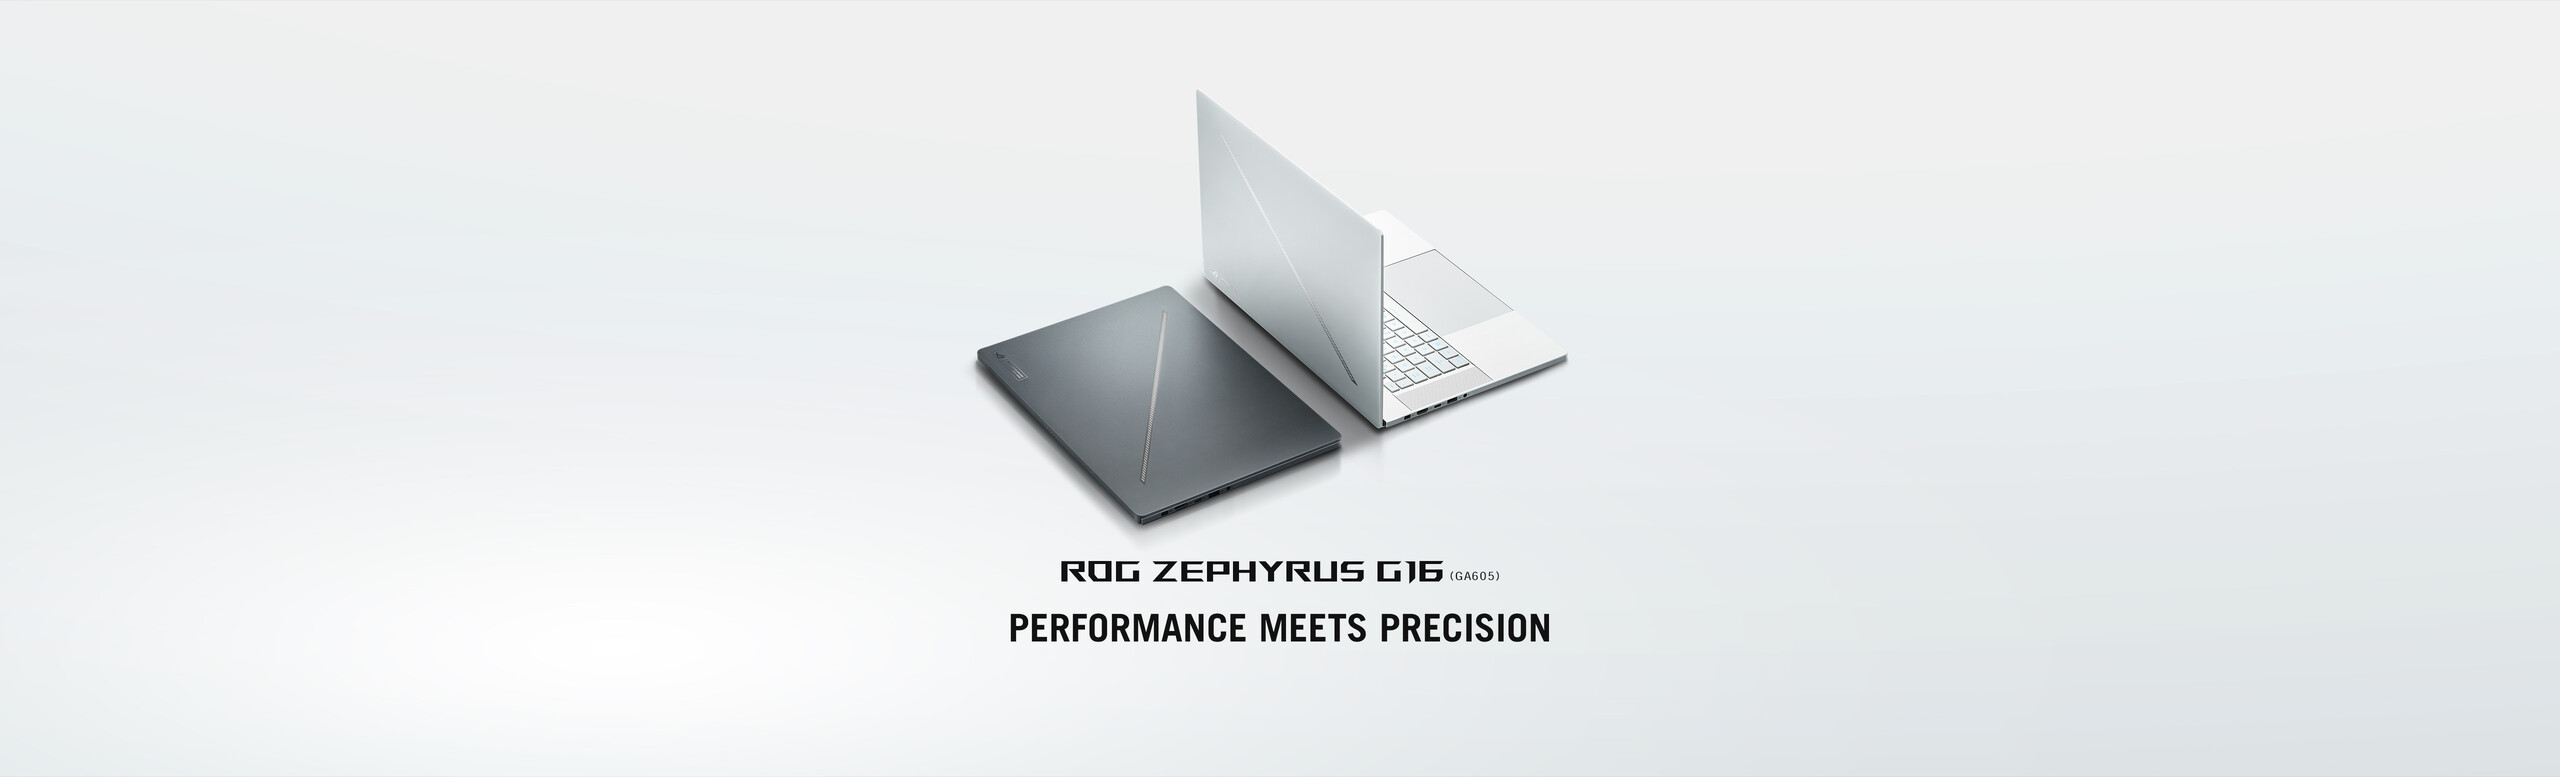 Sleek ROG Zephyrus GJ6 laptop open and closed views with text 'PERFORMANCE MEETS PRECISION'.